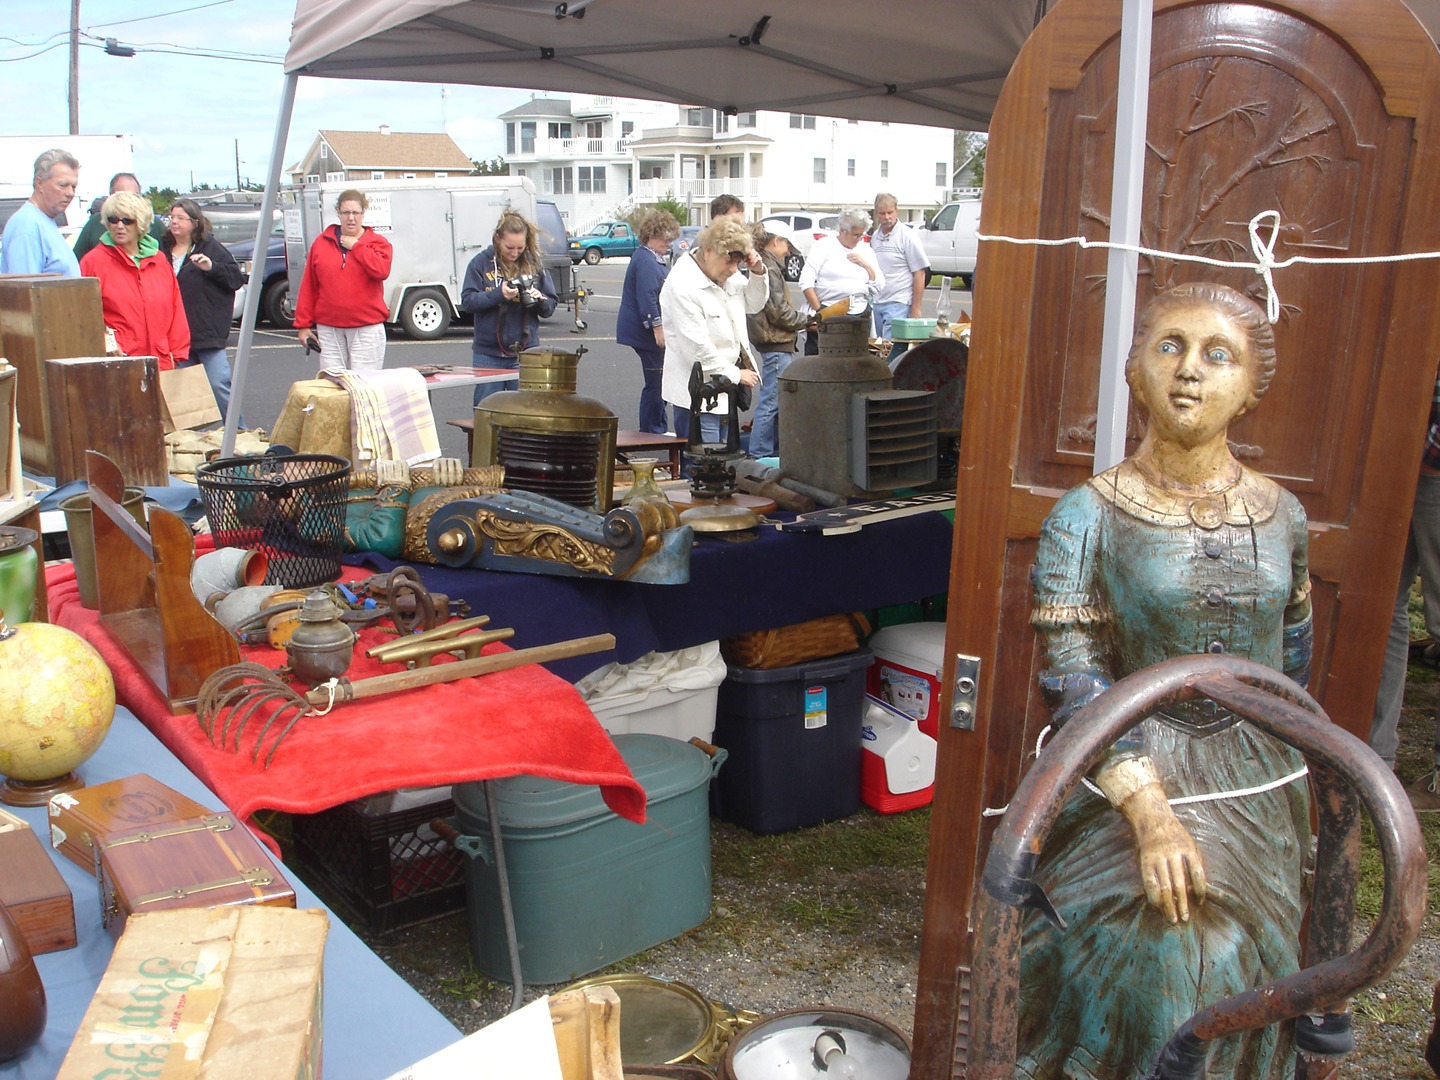 2017 Viking Village Antique and Collectible Show